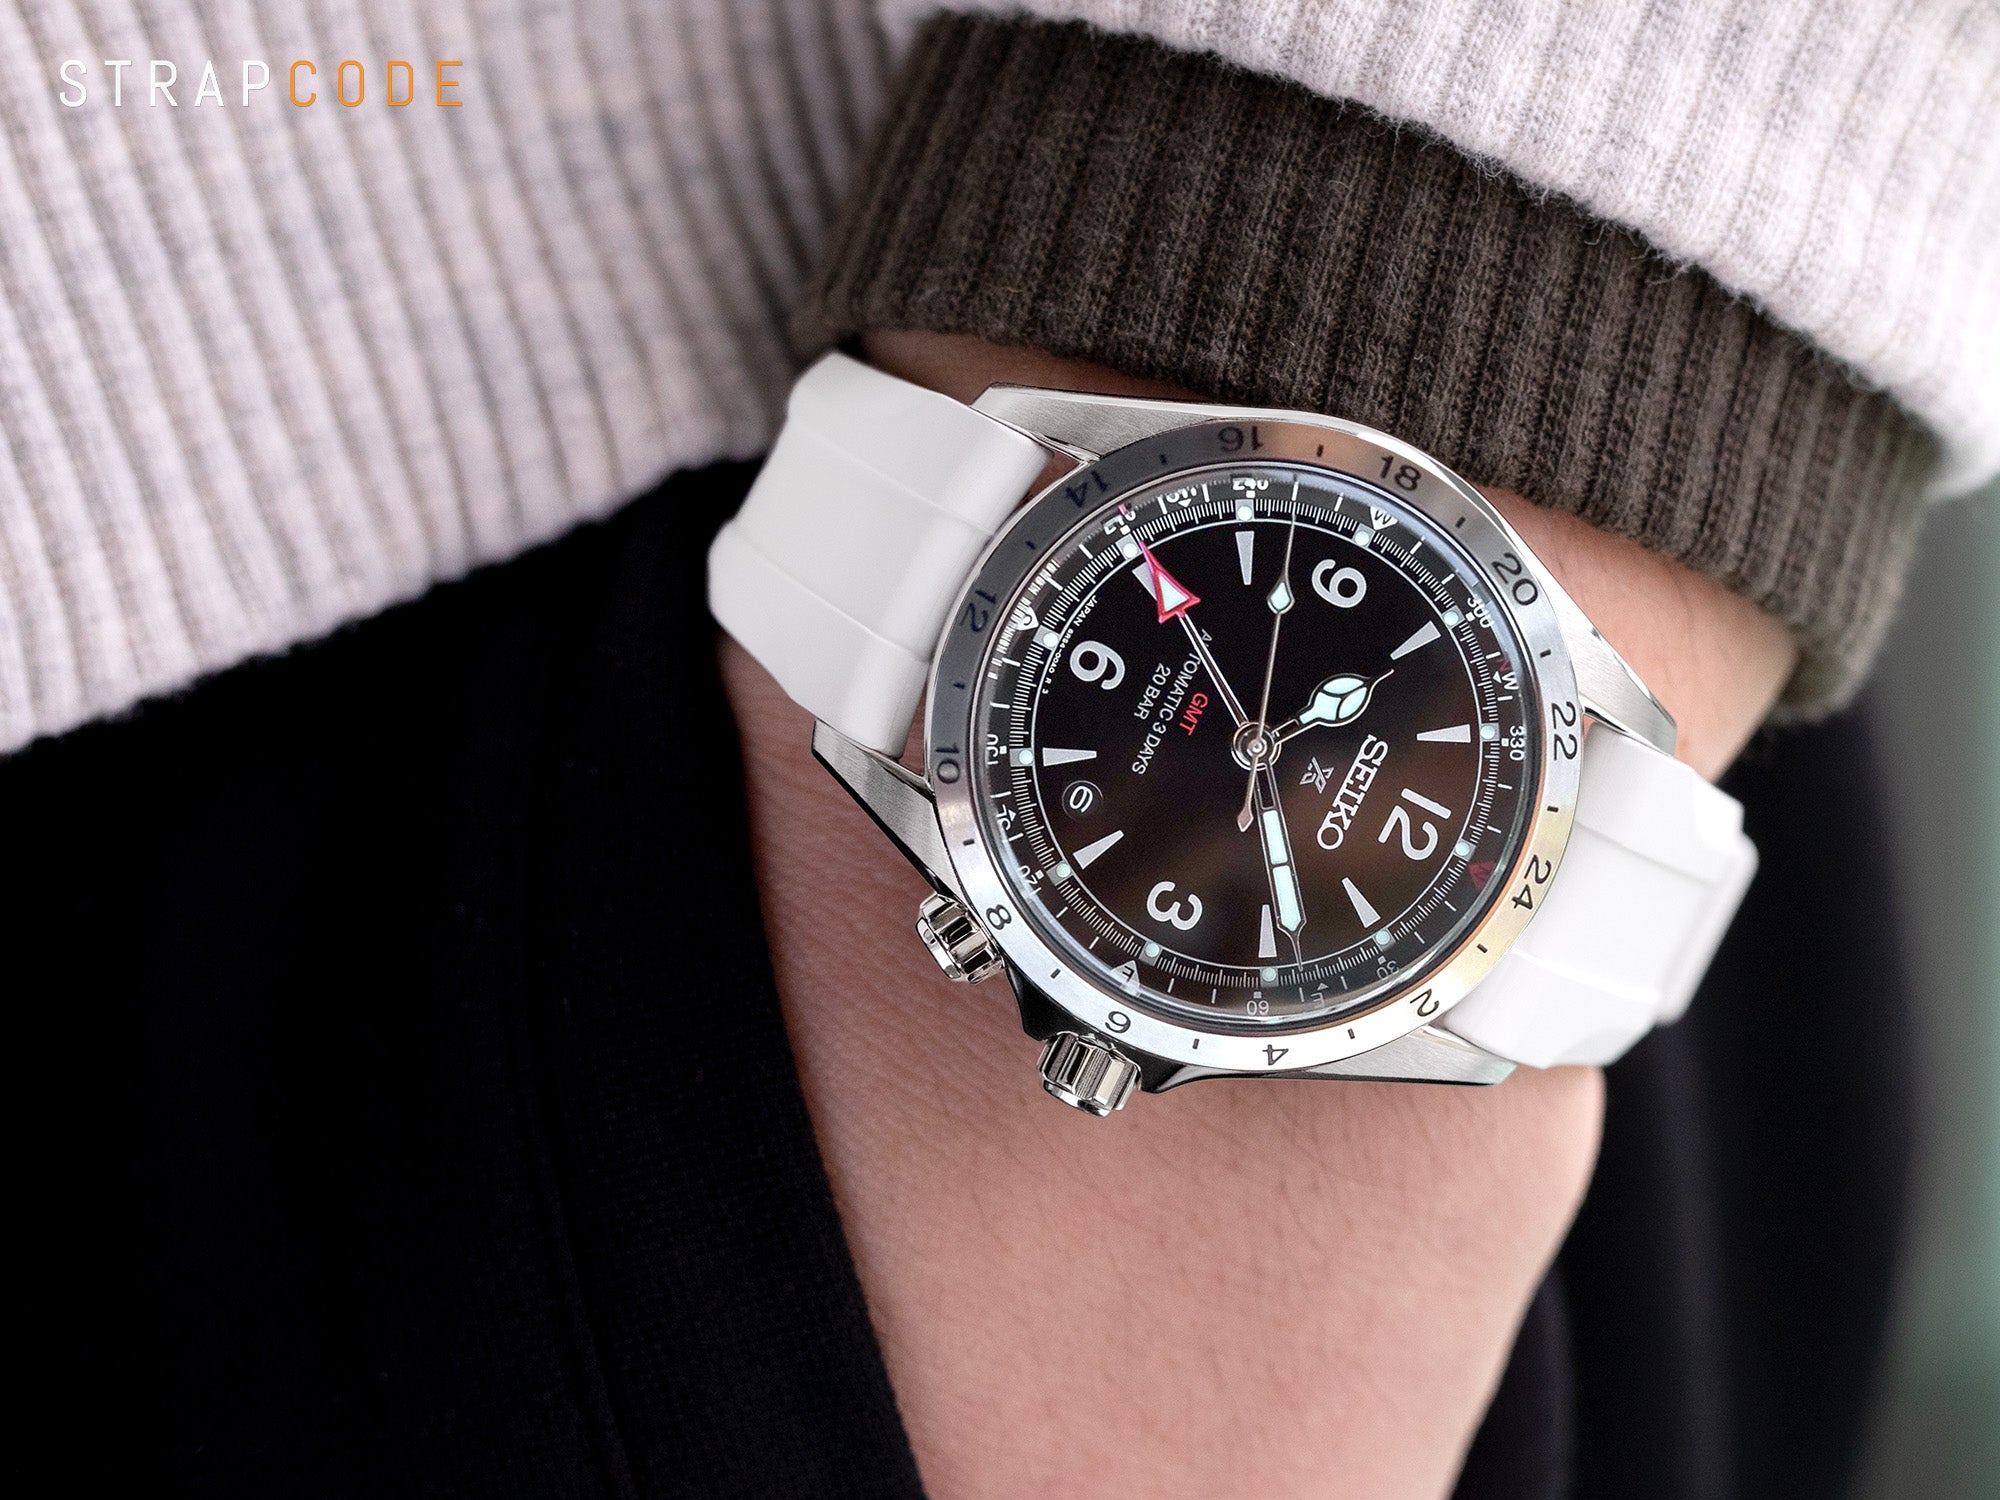 Seiko Alpinist GMT SPB379 Black with Strapcode with resilient white FKM rubber watch strap